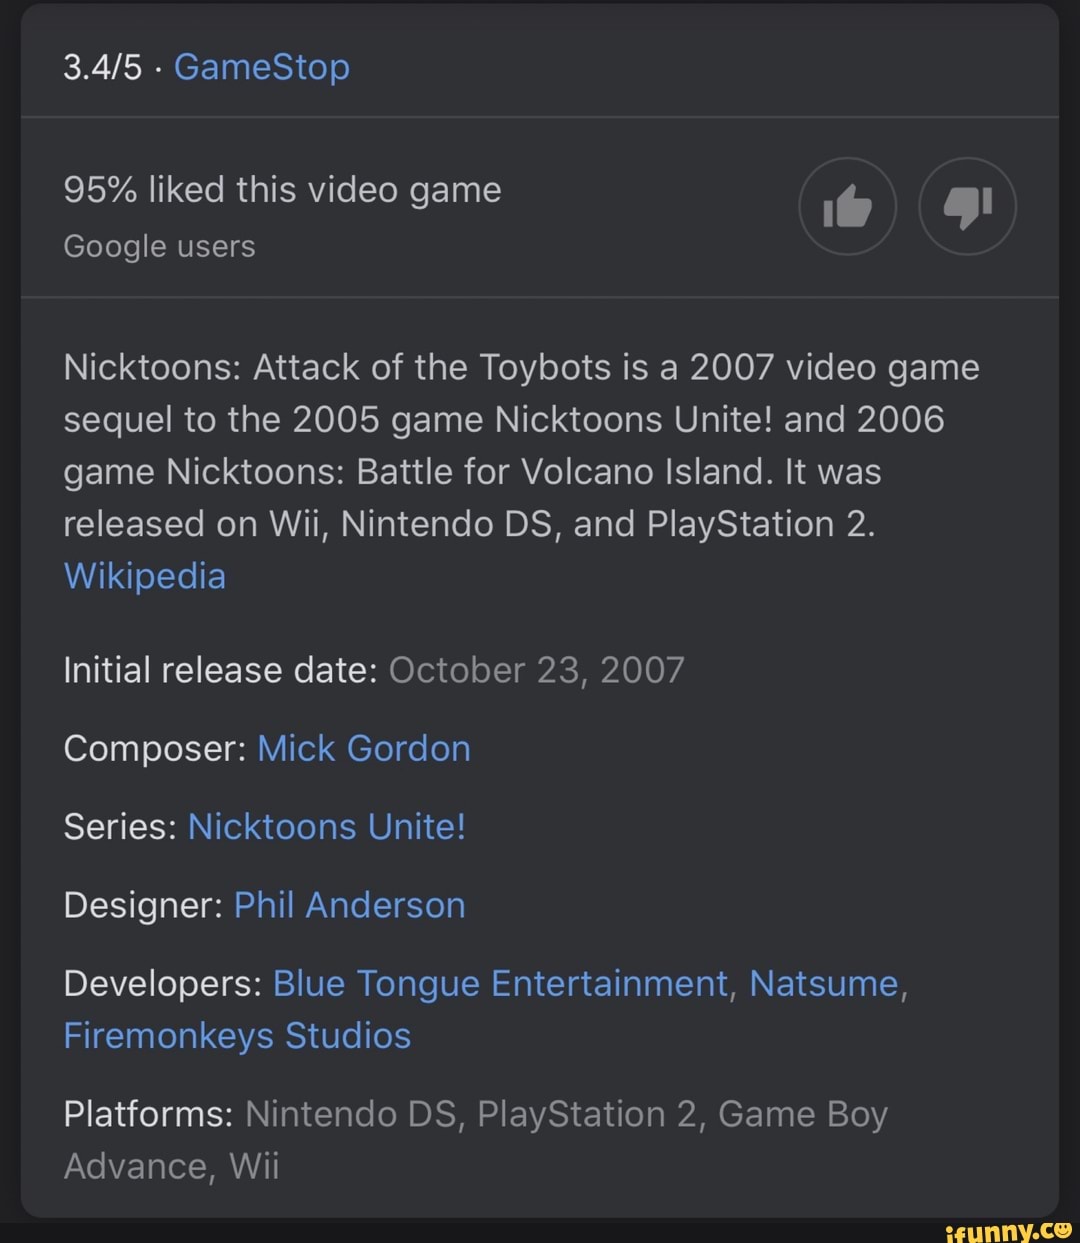 Nicktoons: Attack of the Toybots - Wikipedia